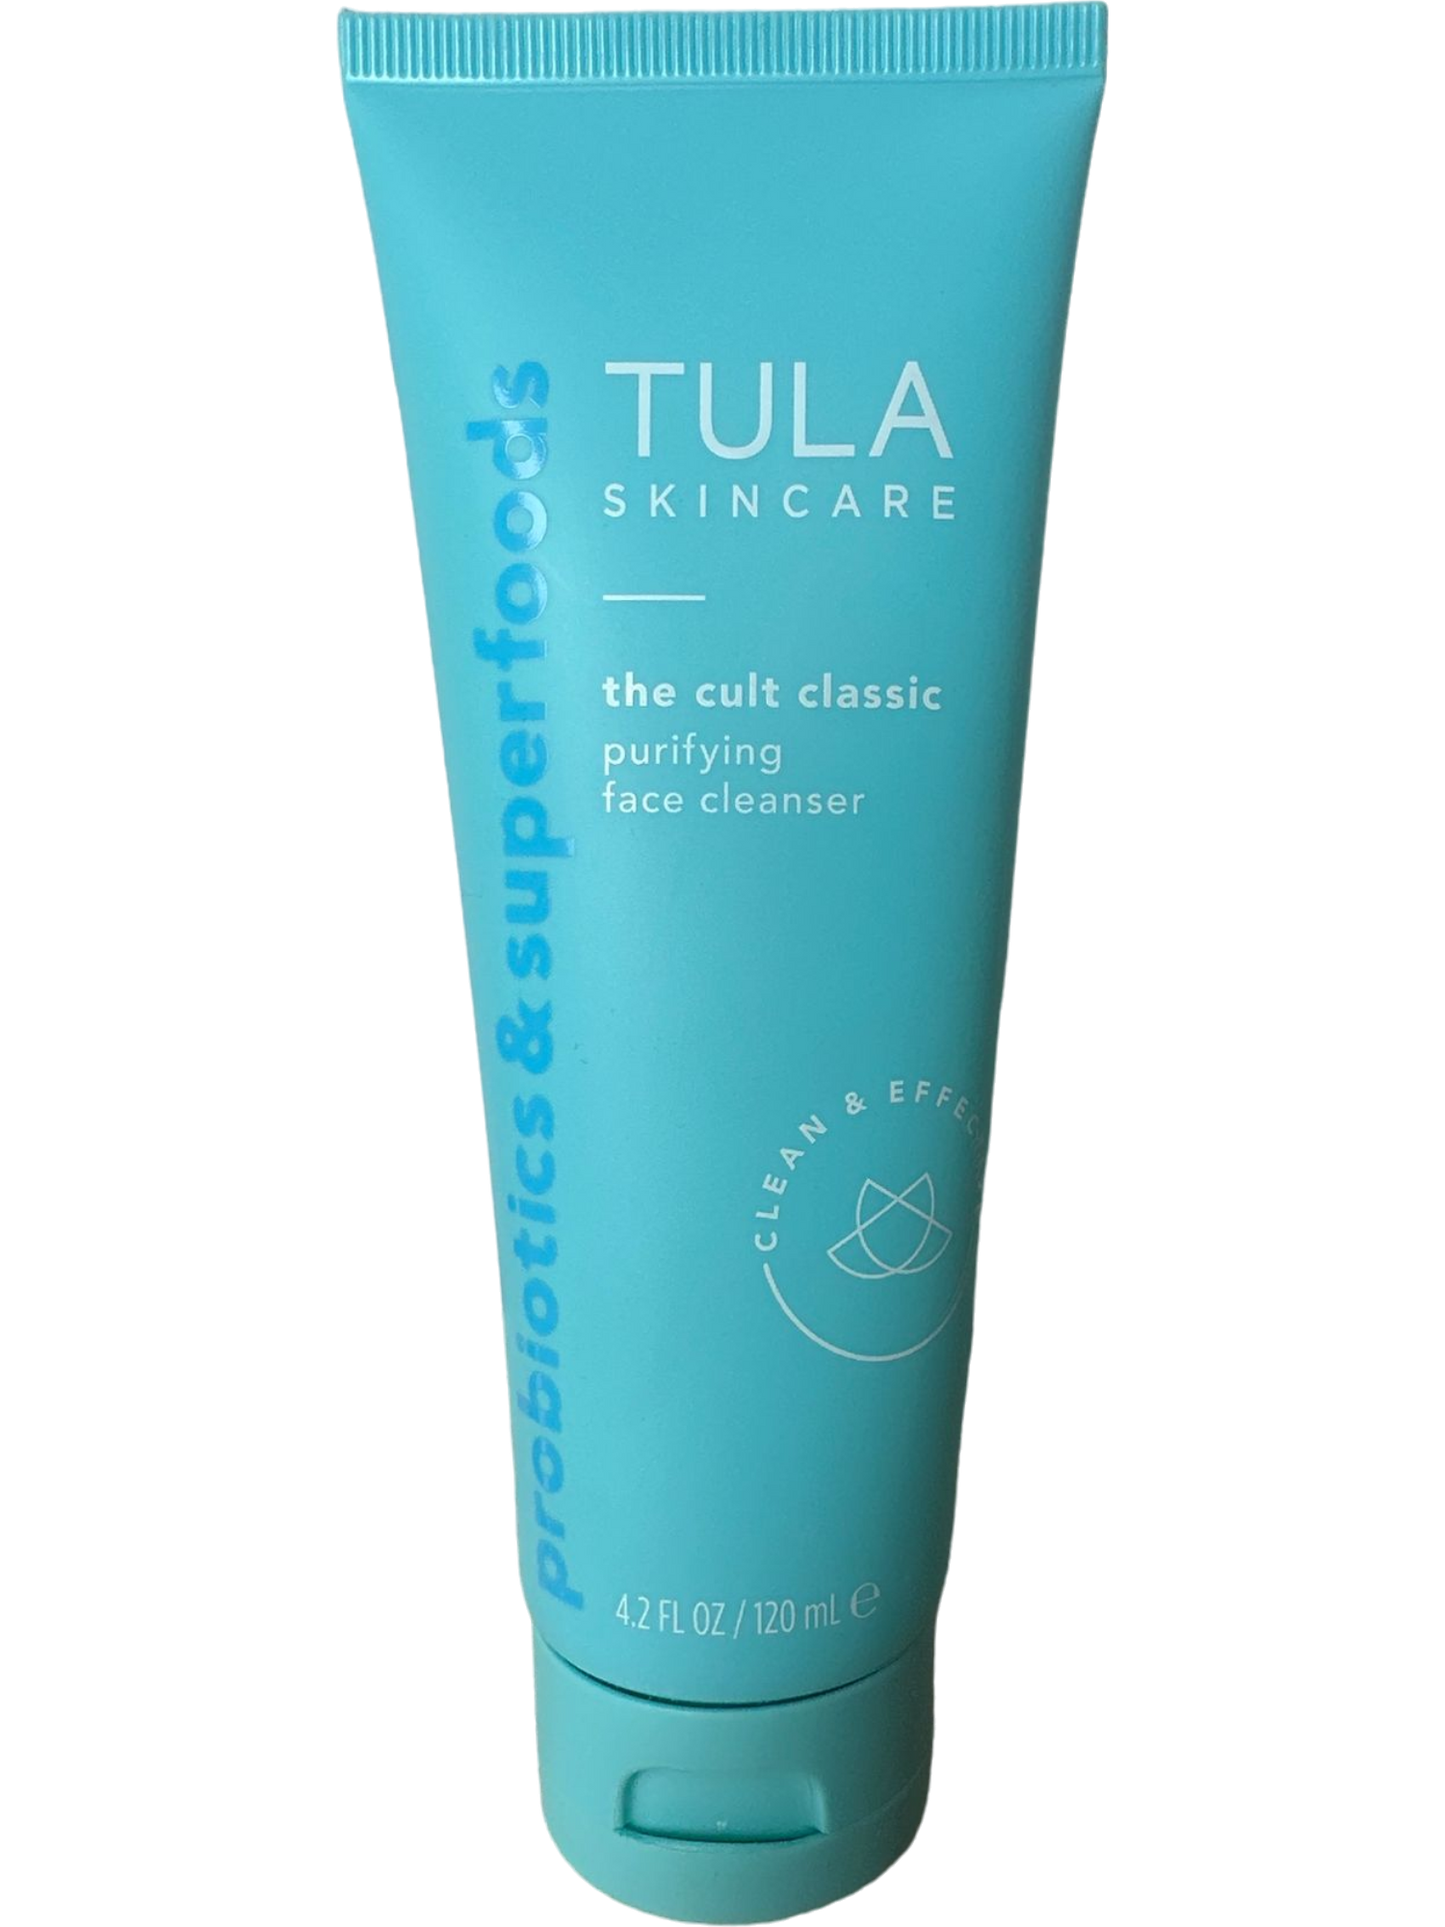 TULA Skincare The Cult Classic Purifying Face Cleanser 4.0 fl oz